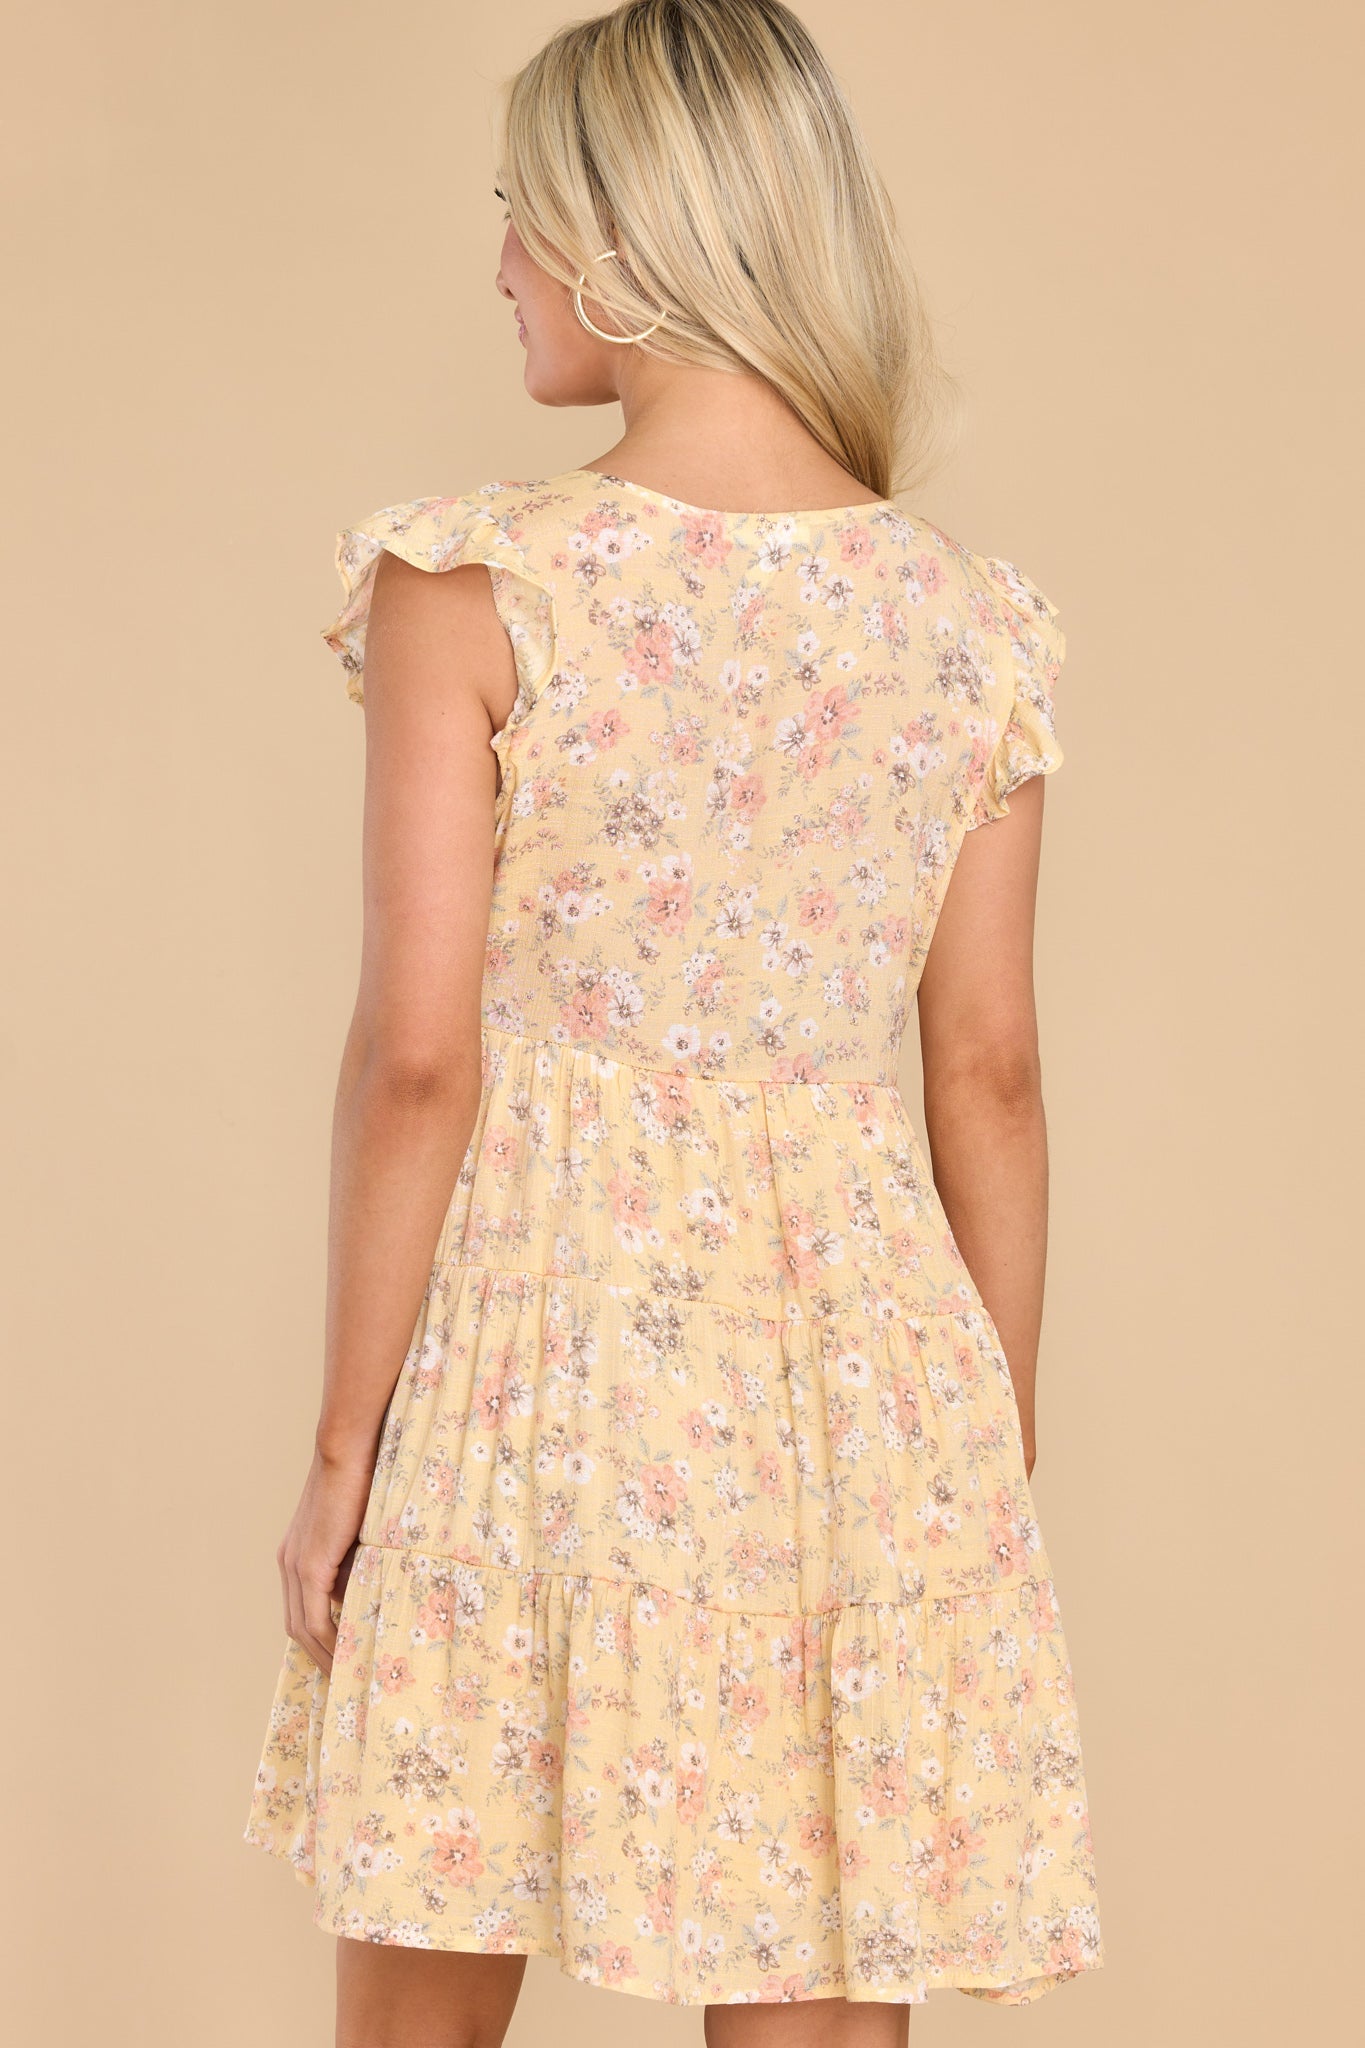 9 With All My Love Pastel Yellow Floral Print Dress at reddress.com